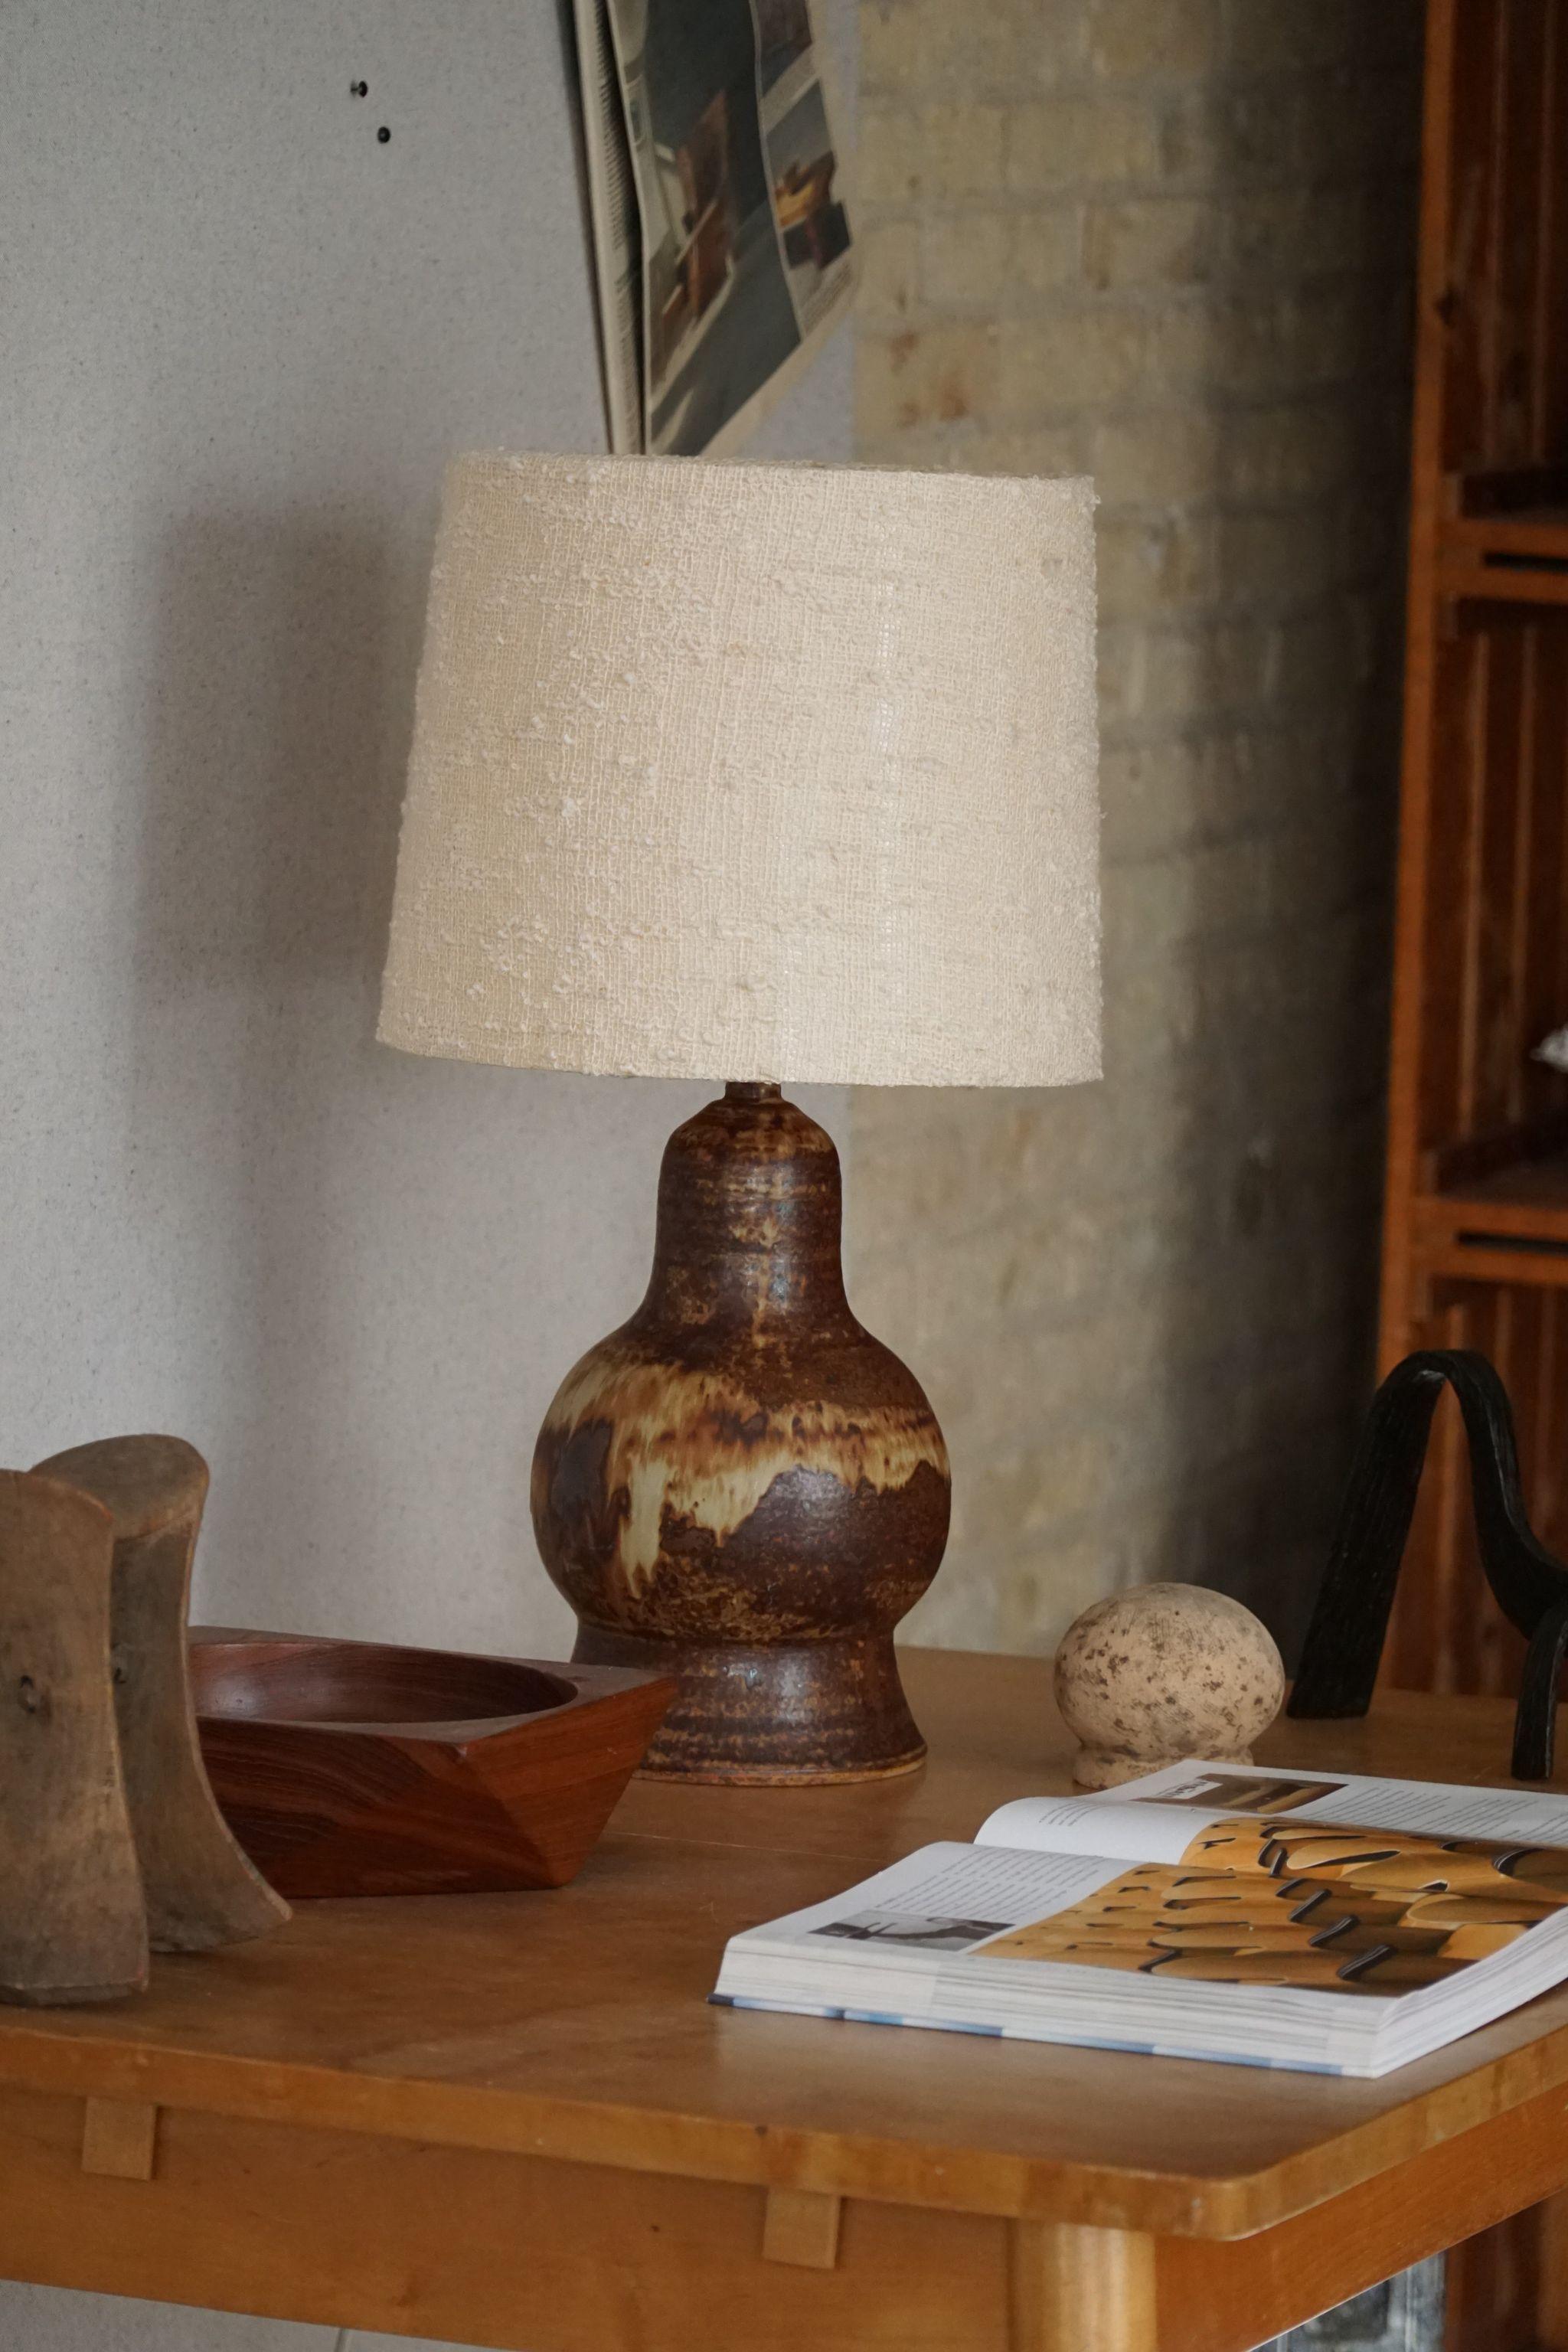 Danish Modern organic shaped stoneware table lamp. Made in various earthern / brown colors. Made in the 1970s by Visby Keramik, signed underneath. 

This item is in a great vintage condition. This beautiful and calm lighting complements many types